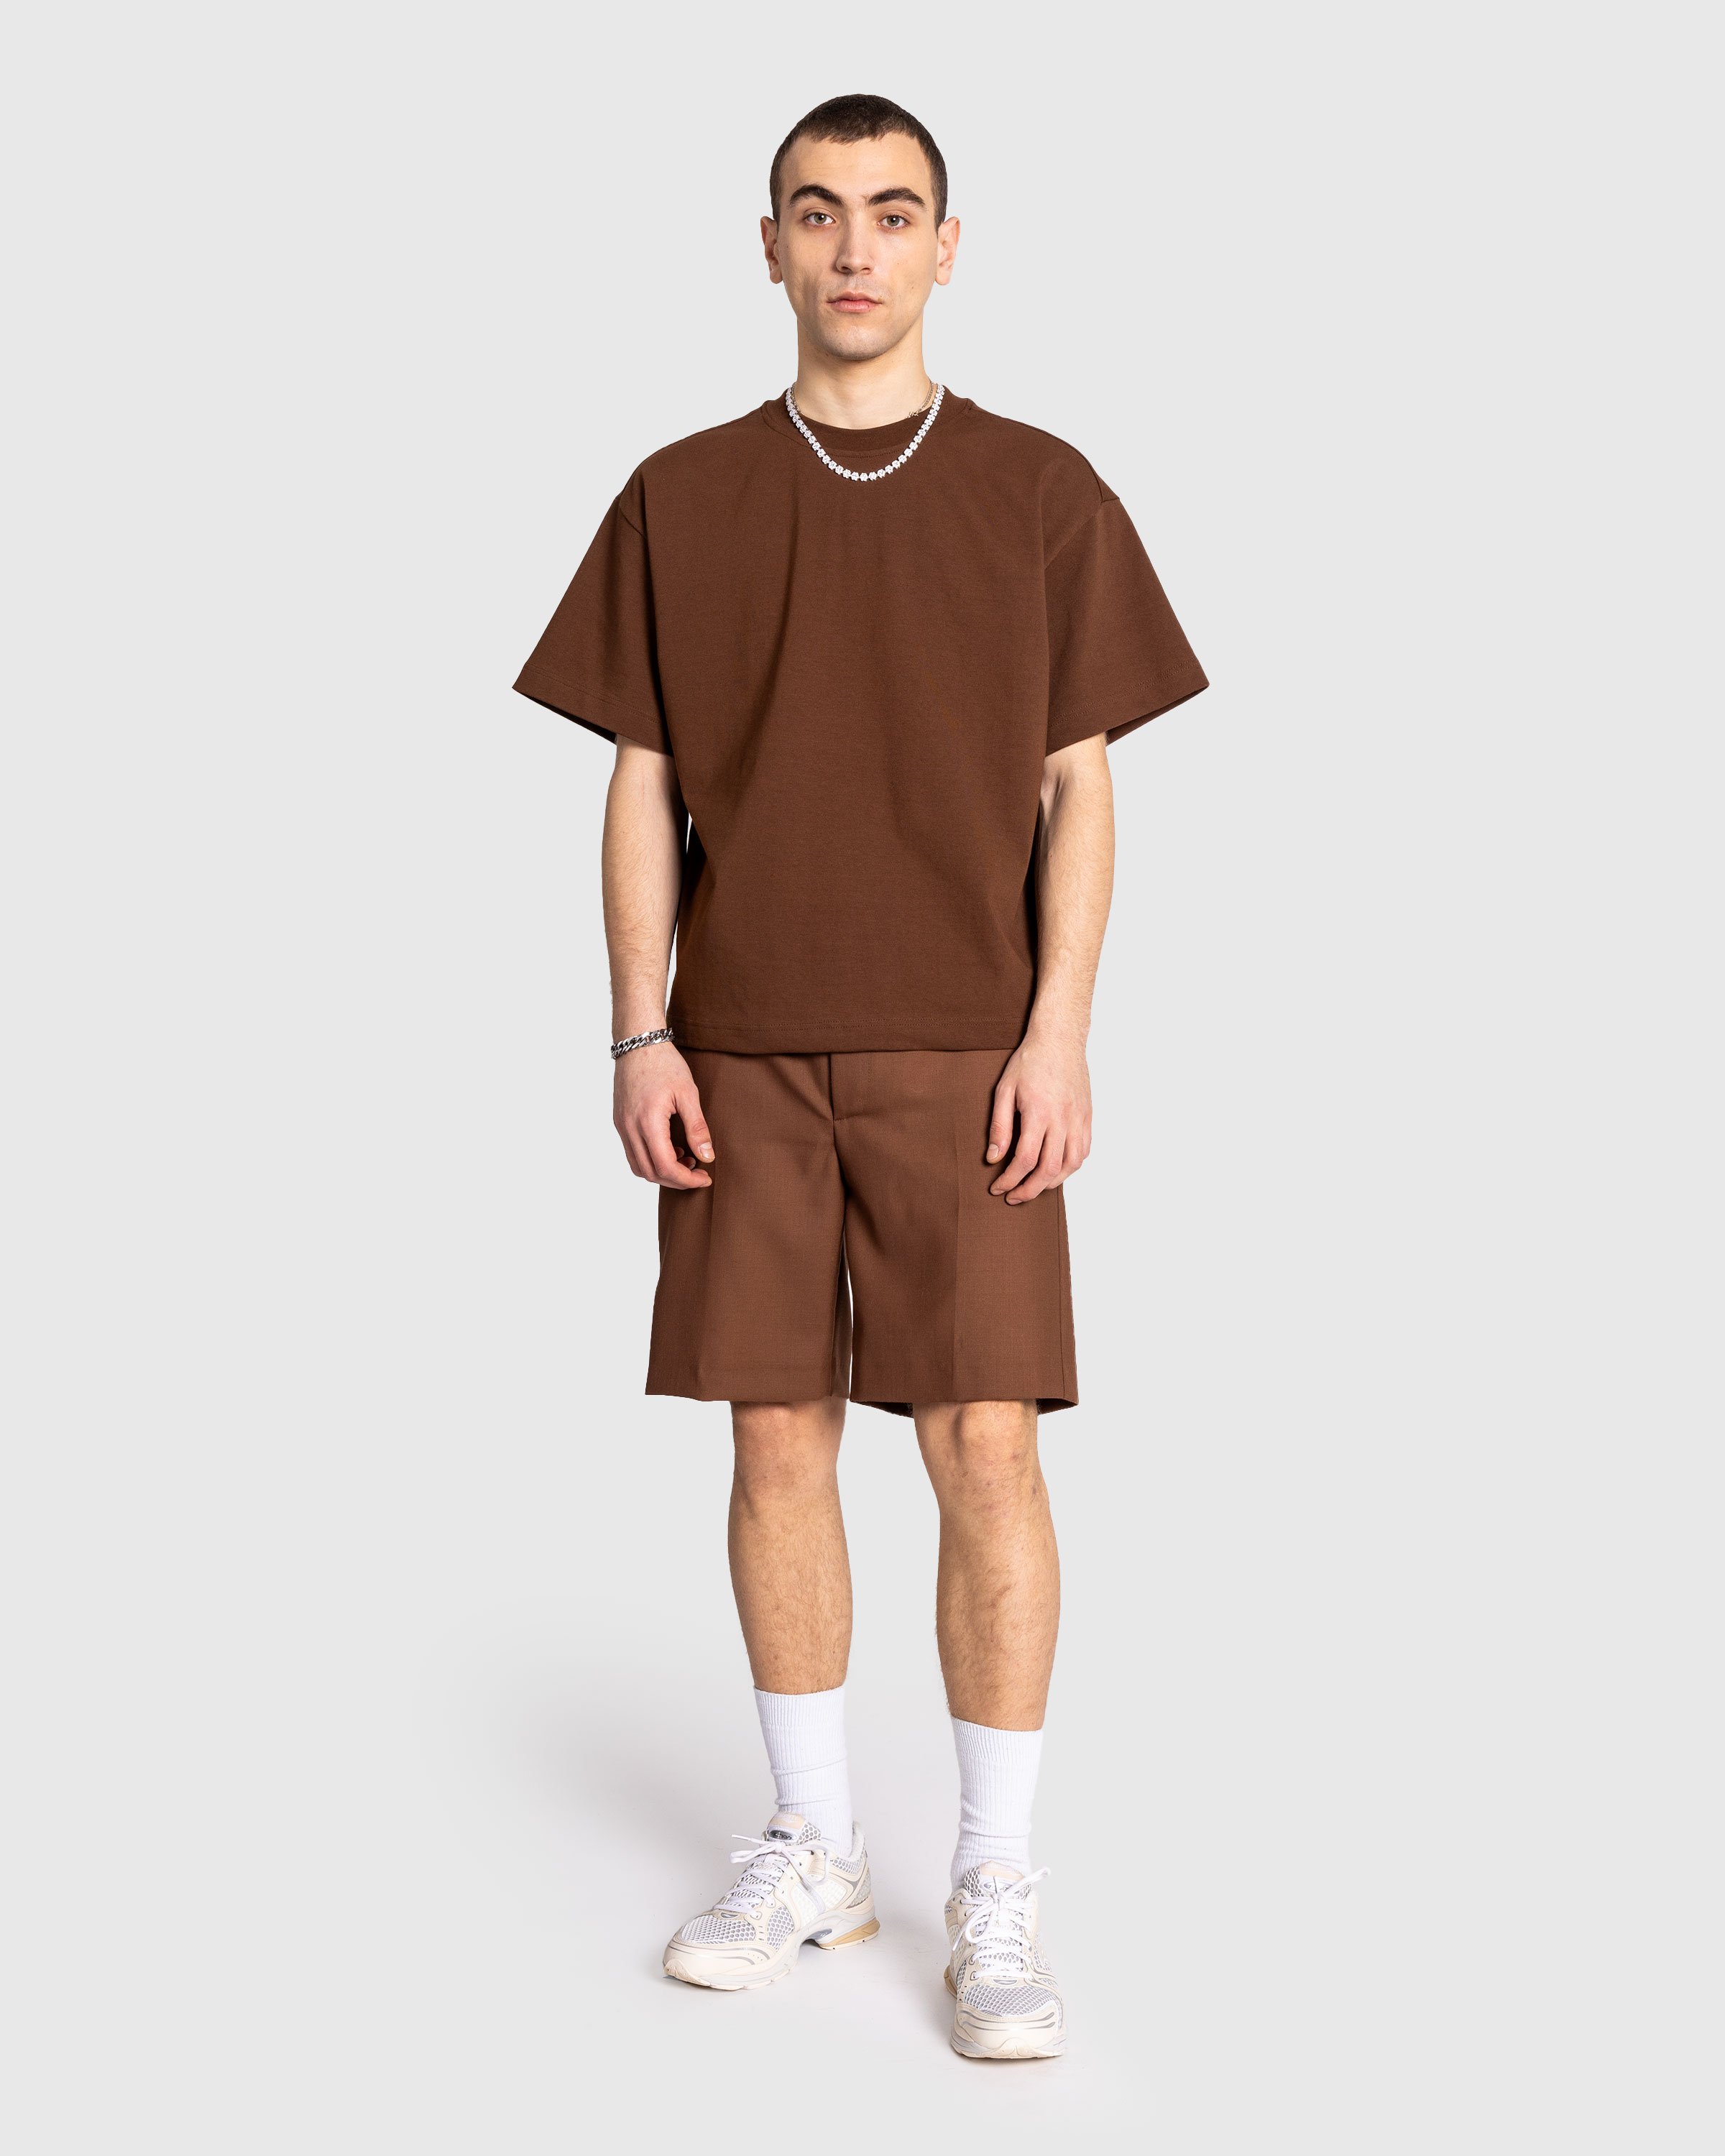 Séfr - ATELIER TEE HEAVY BROWN COTTON - Clothing - Brown - Image 3